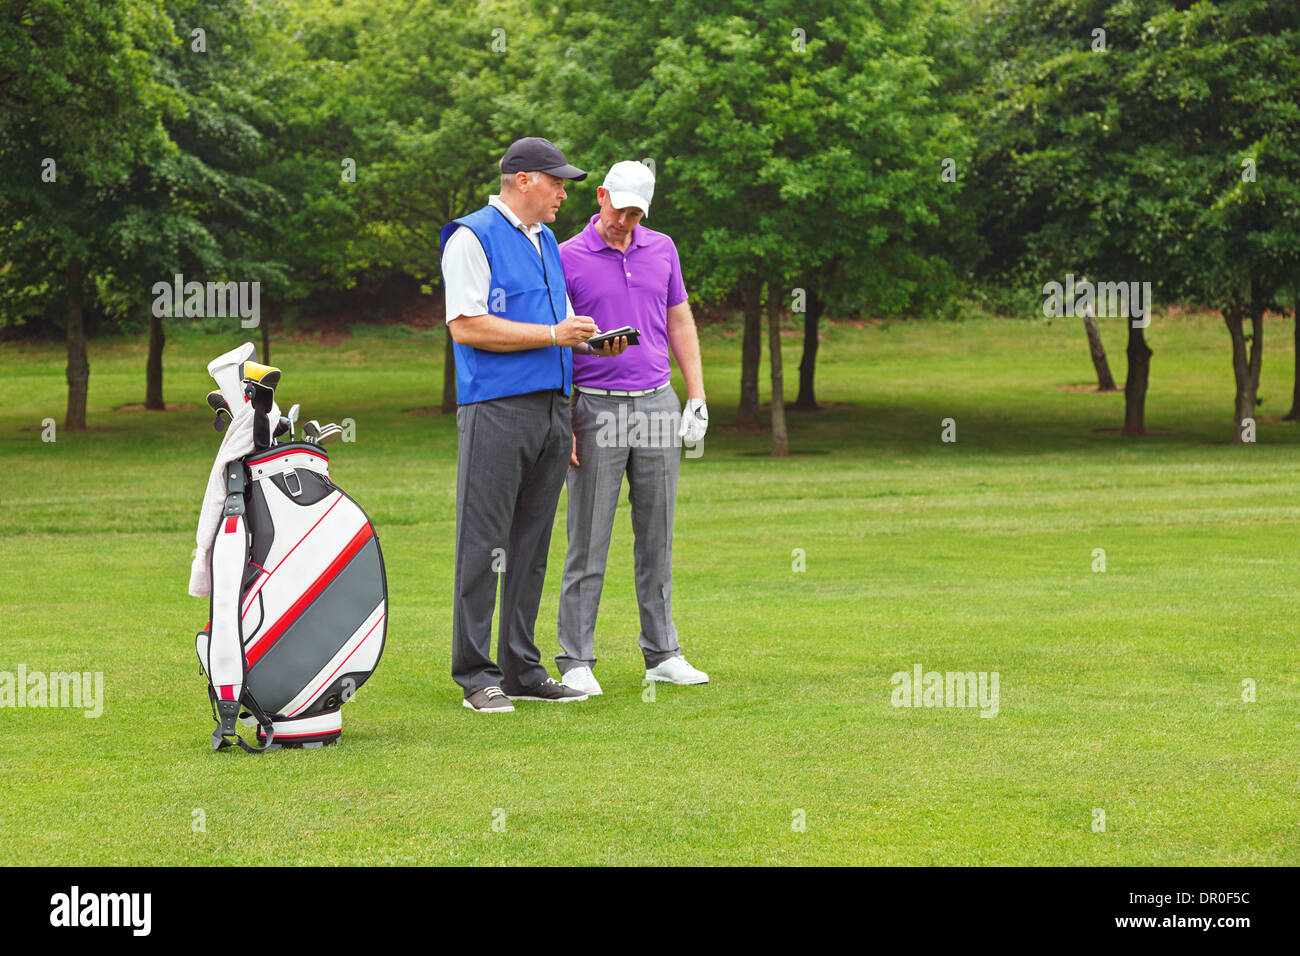 Golfer and caddy standing on the fairway of a par 4 looking at a course guide. Stock Photo